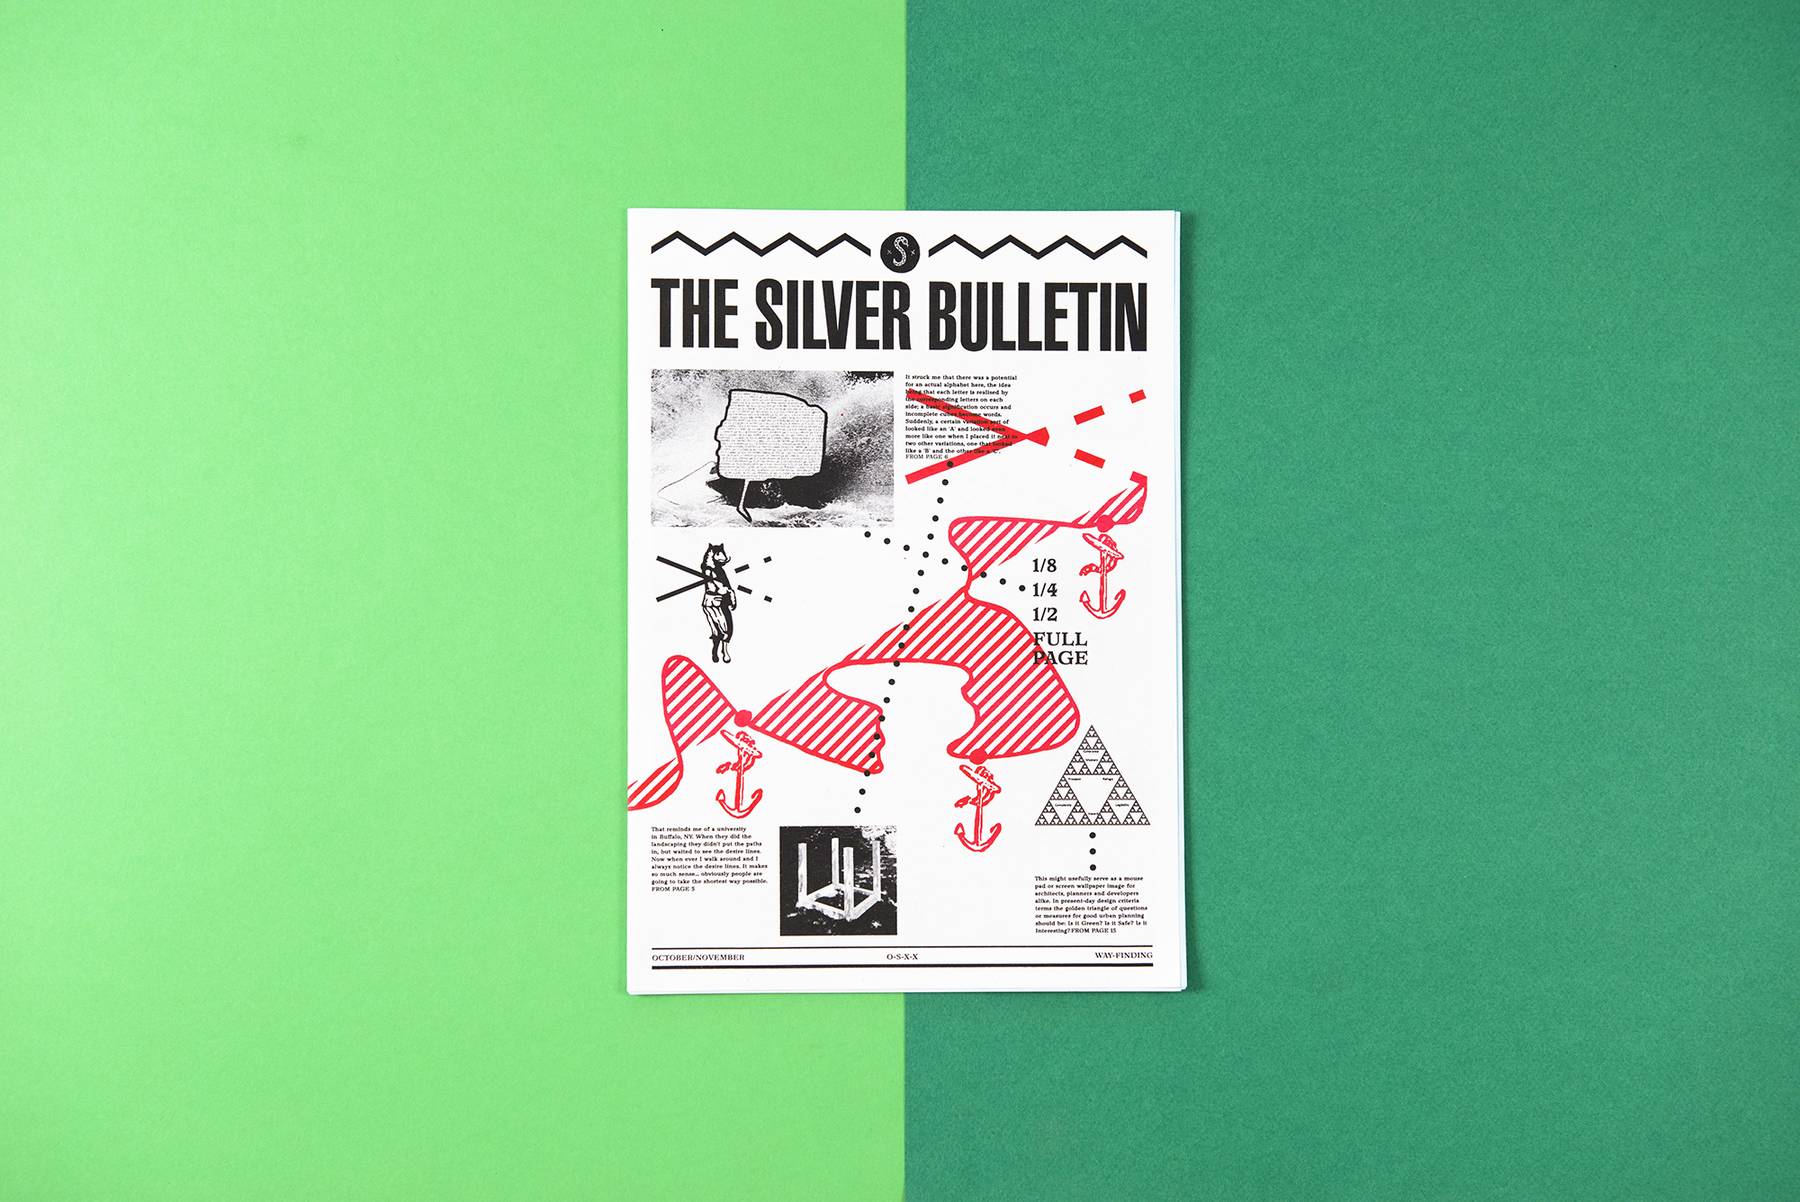 The Silver Bulletin 2011 image